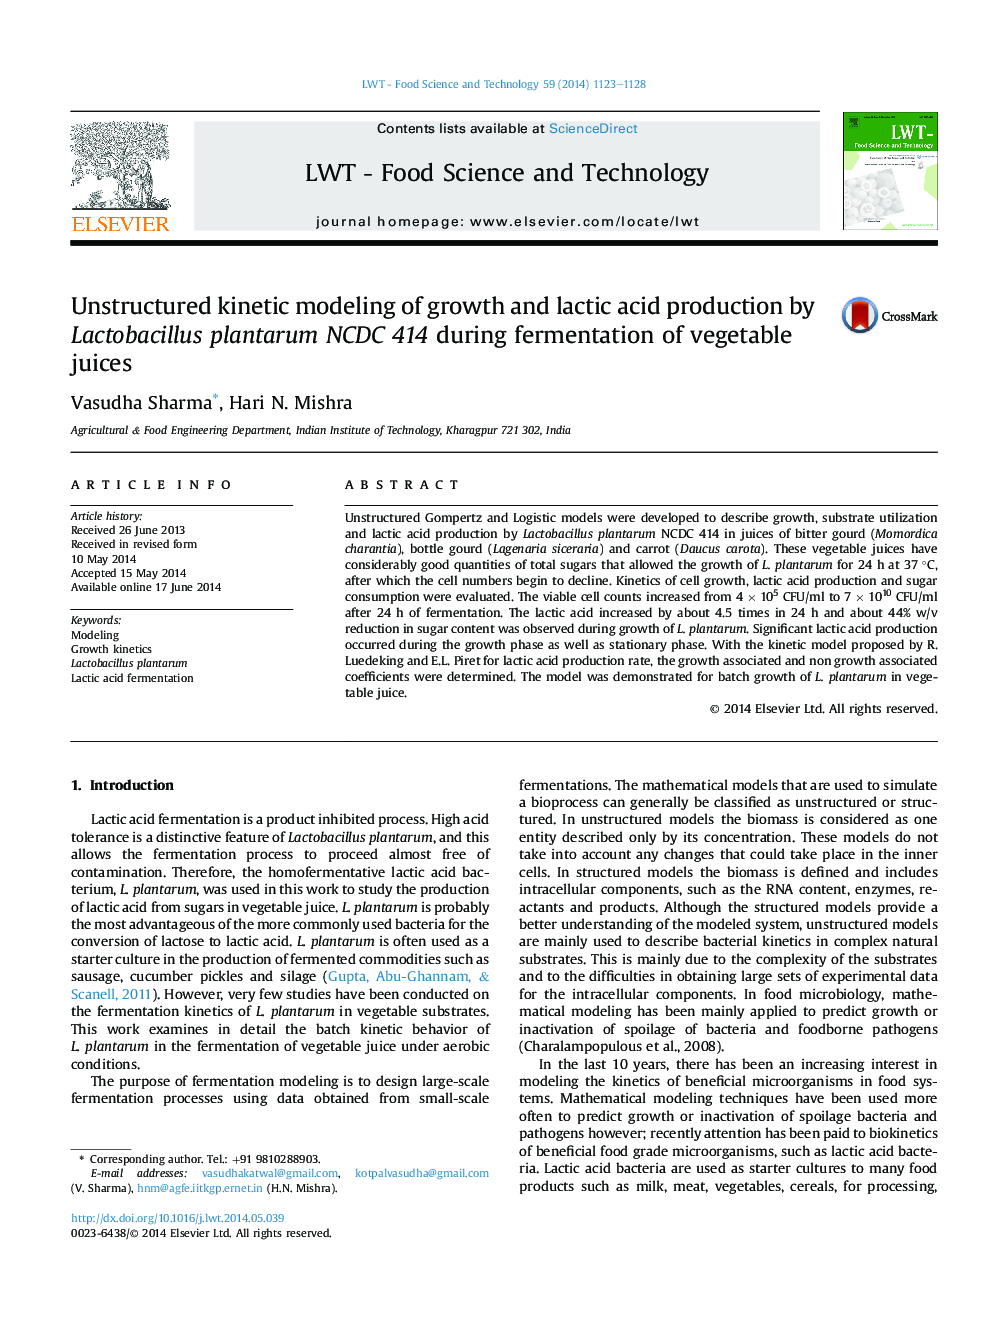 Unstructured kinetic modeling of growth and lactic acid production by Lactobacillus plantarum NCDC 414 during fermentation of vegetable juices